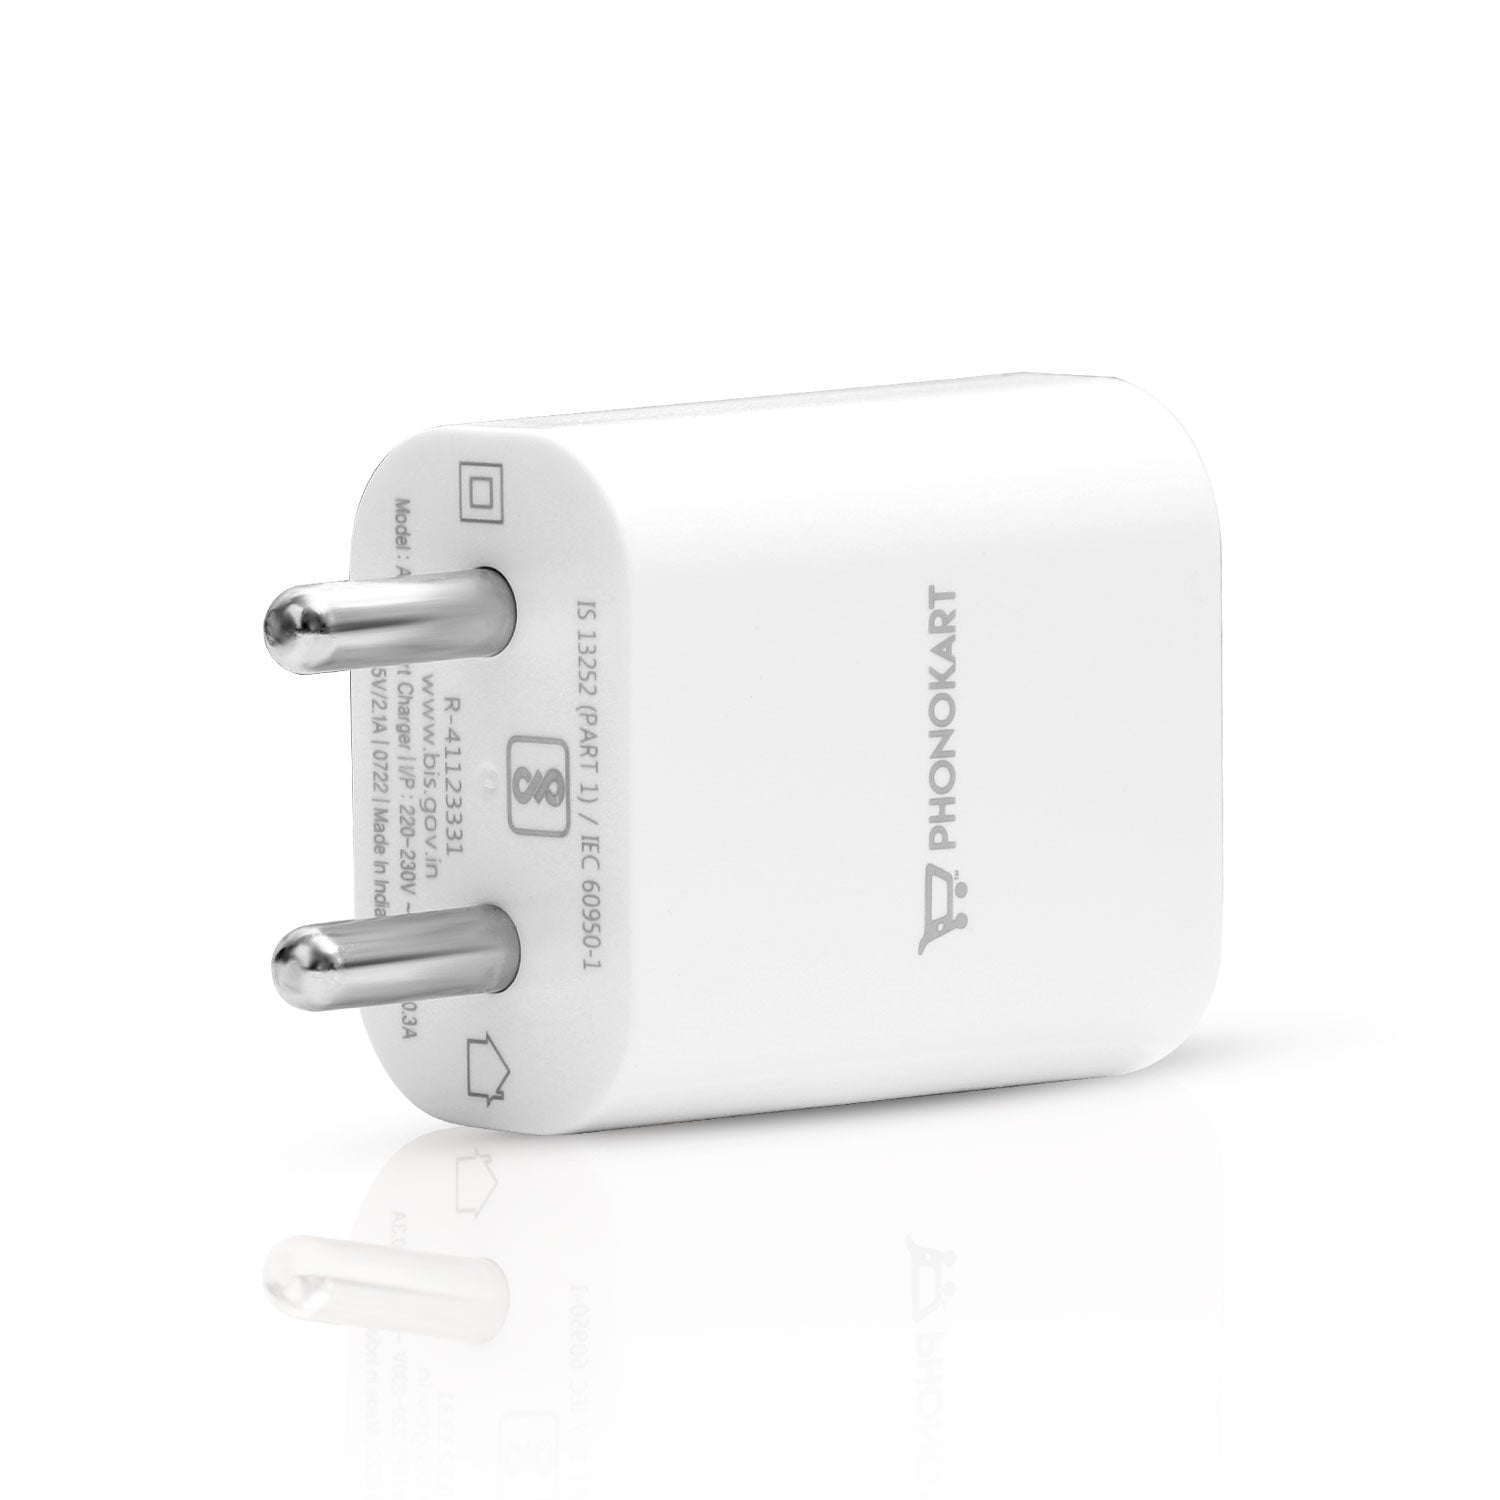 ADAM POWER ADAPTER MOBILE CHARGER (WHITE)